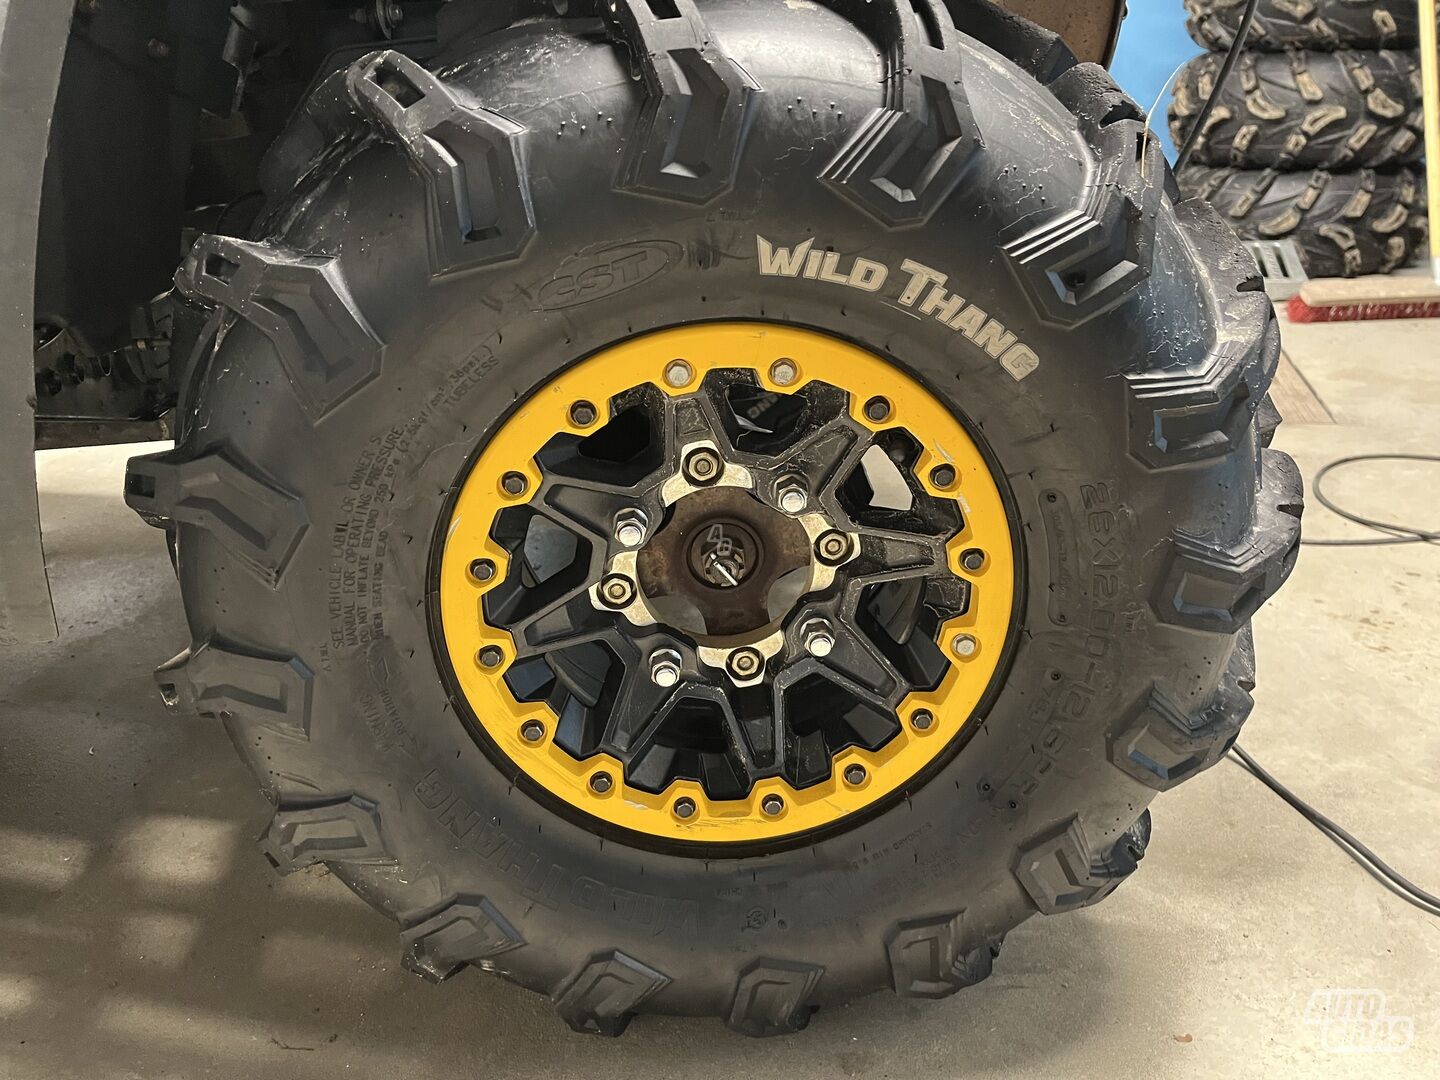 CST Wildthang 28 R12 universal tyres atvs, quads